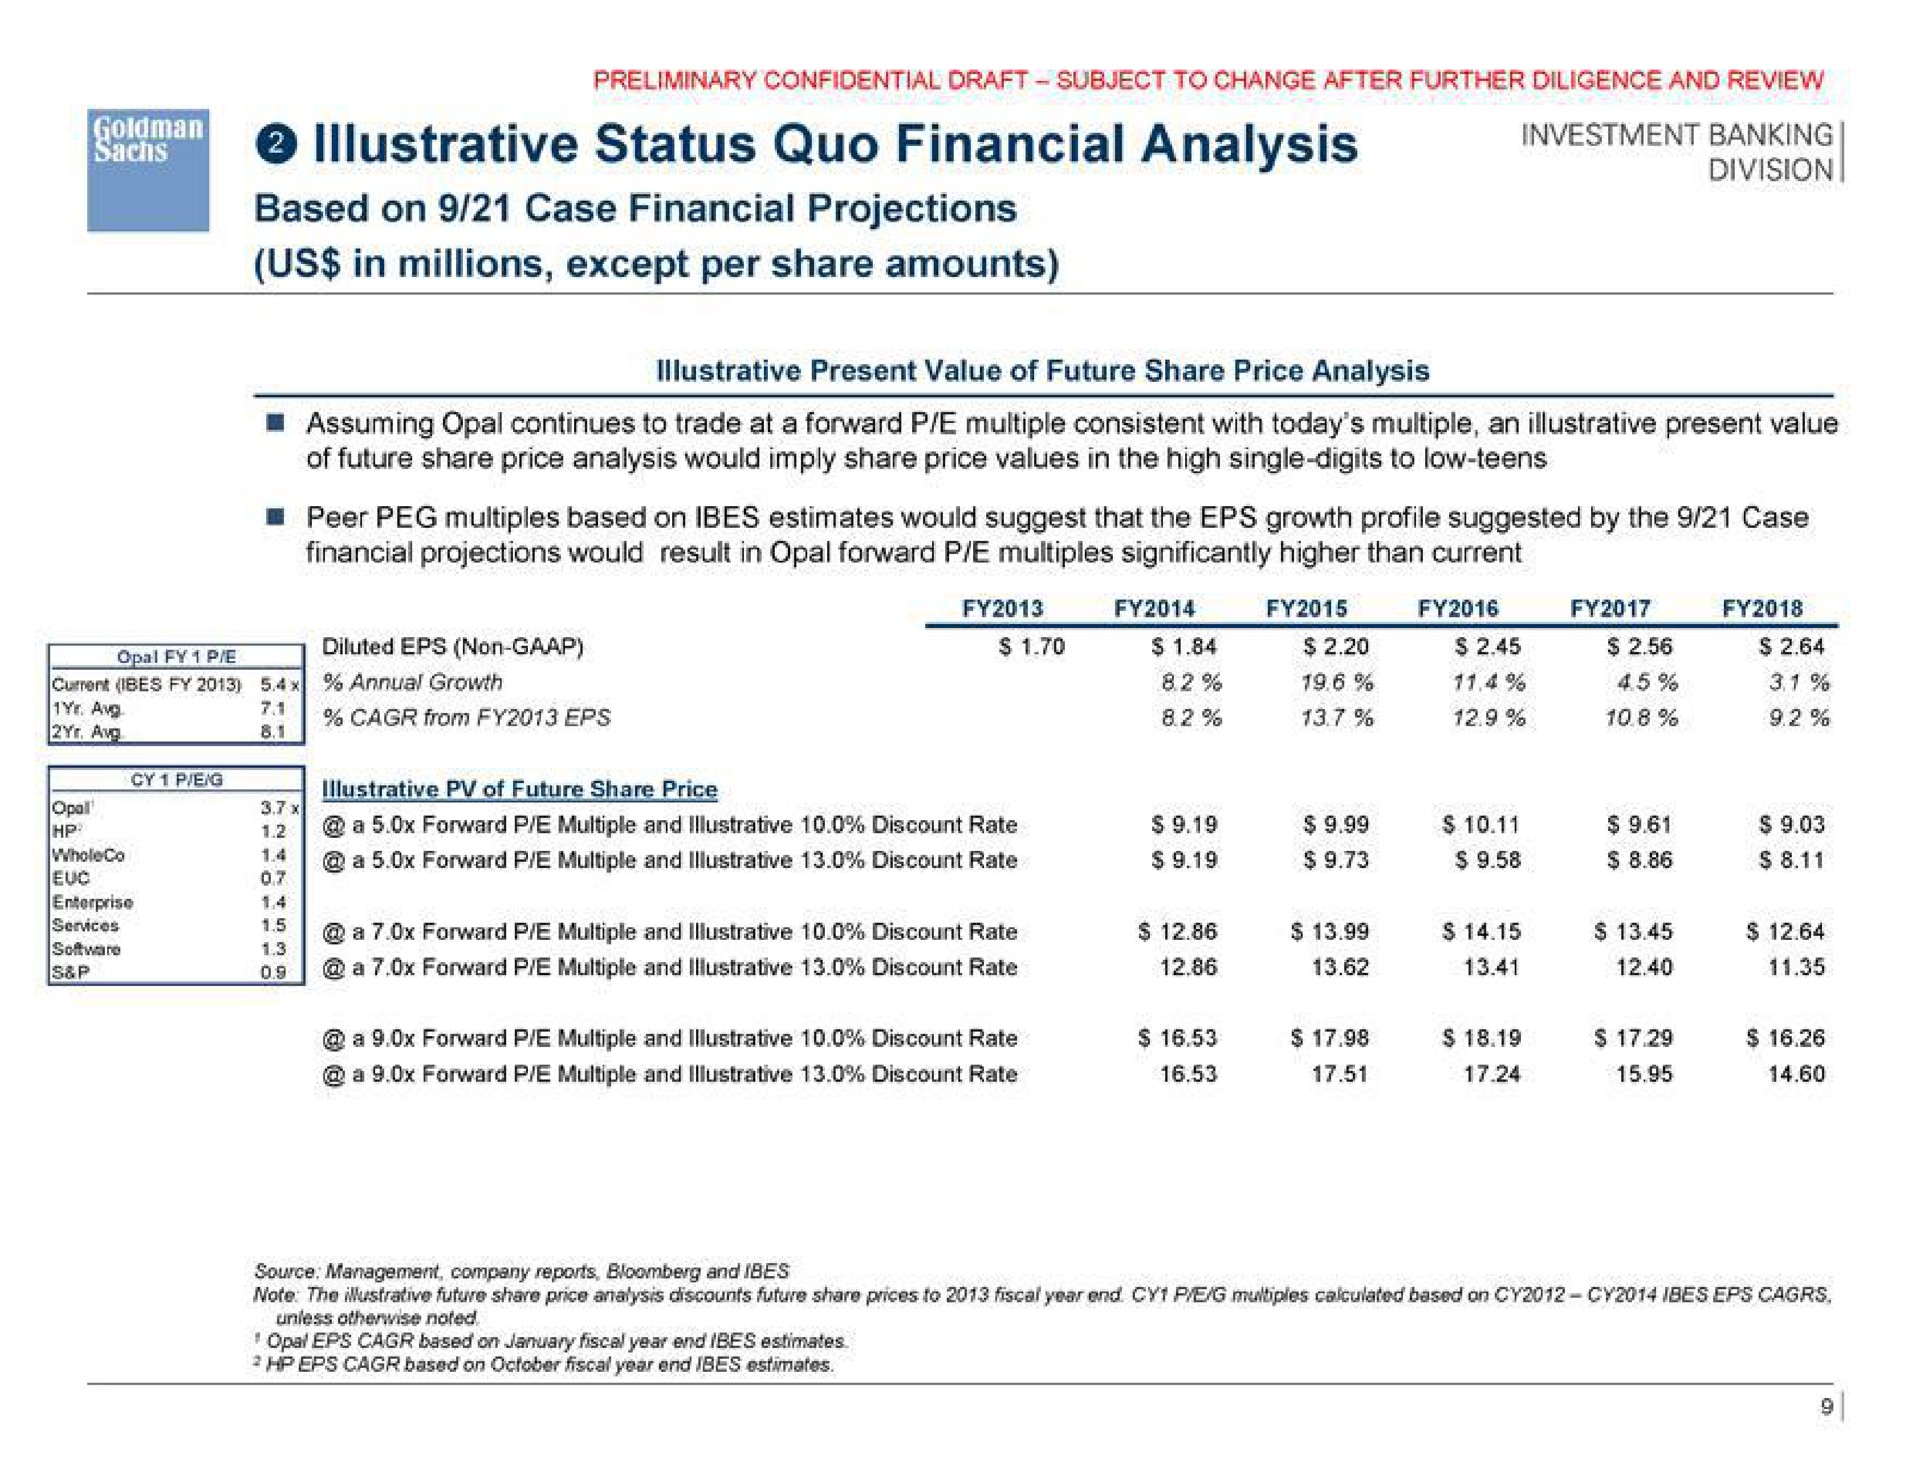 illustrative status quo financial analysis division based on case financial projections us in millions except per share amounts | Goldman Sachs